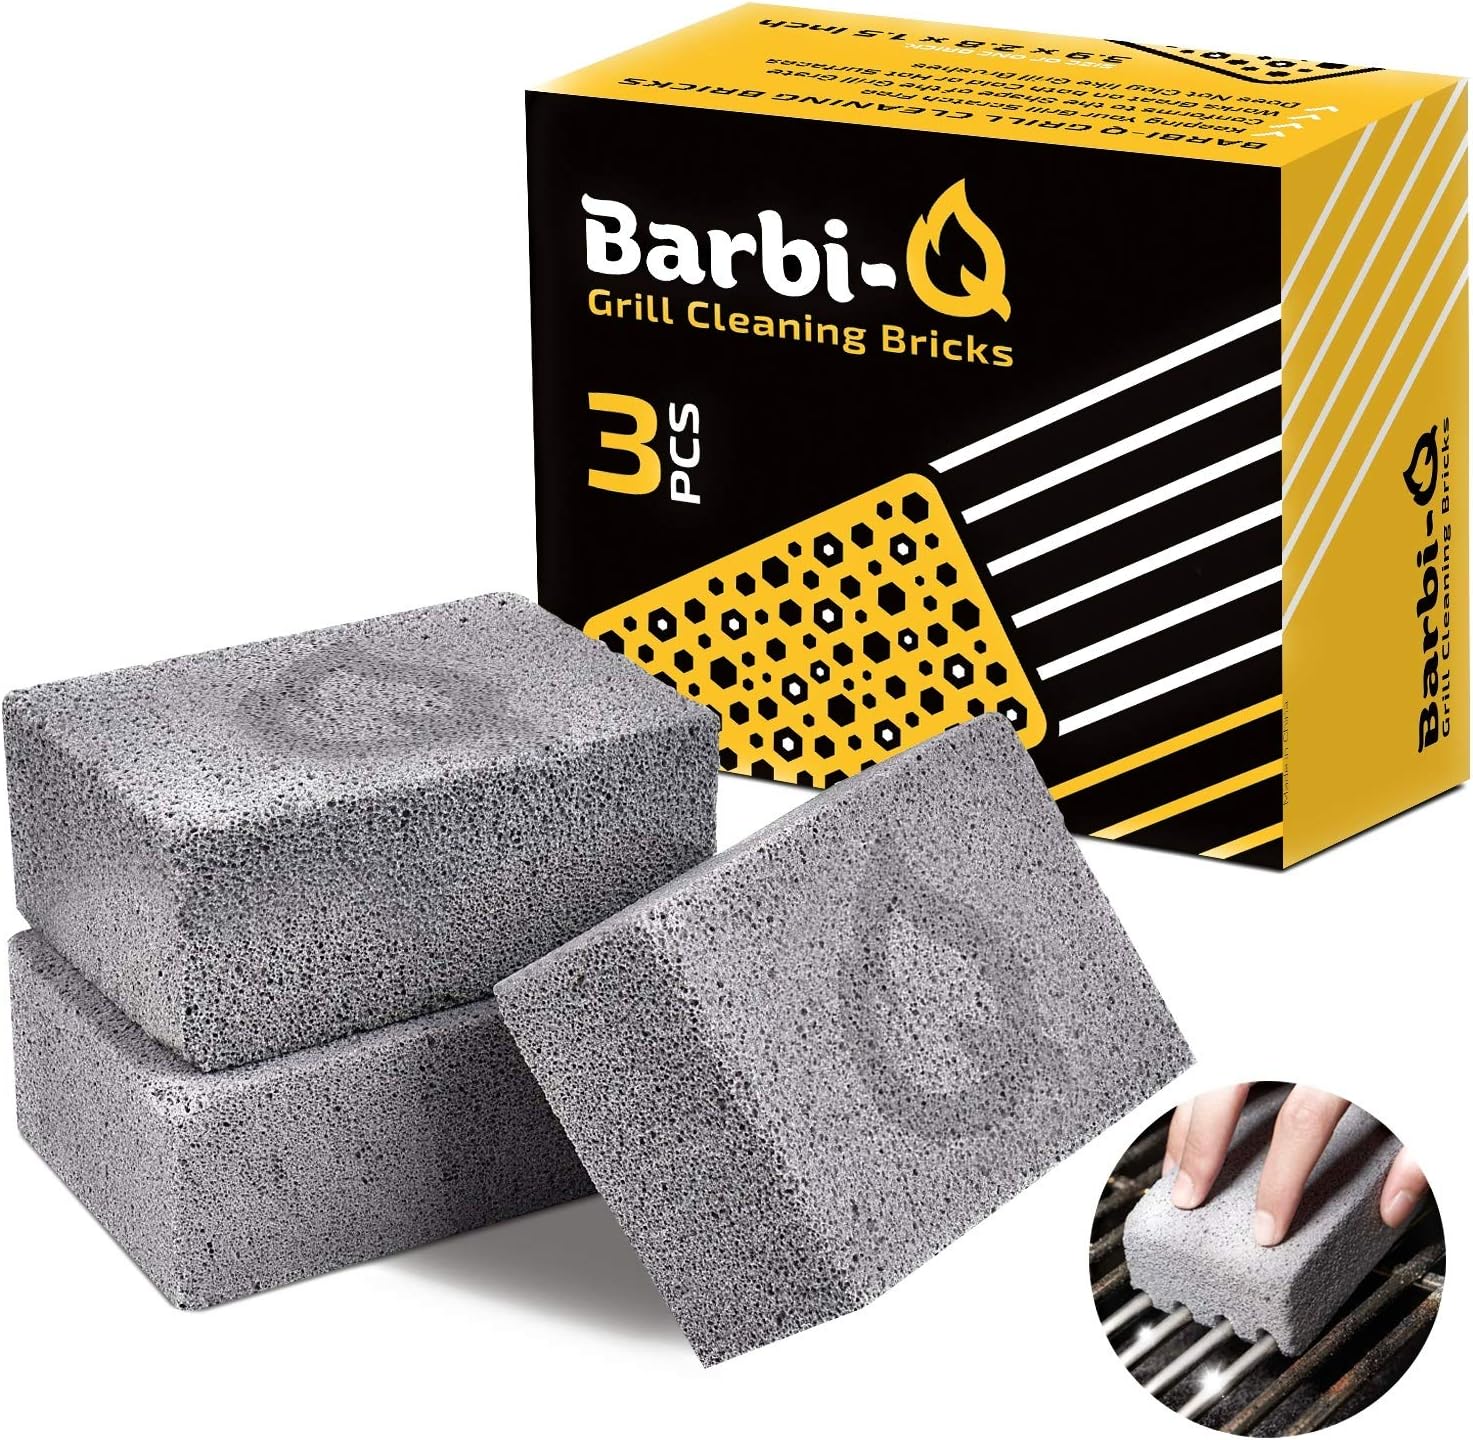 Barbi-Q Grill Cleaning Bricks - Grill Stone | Griddle [...]